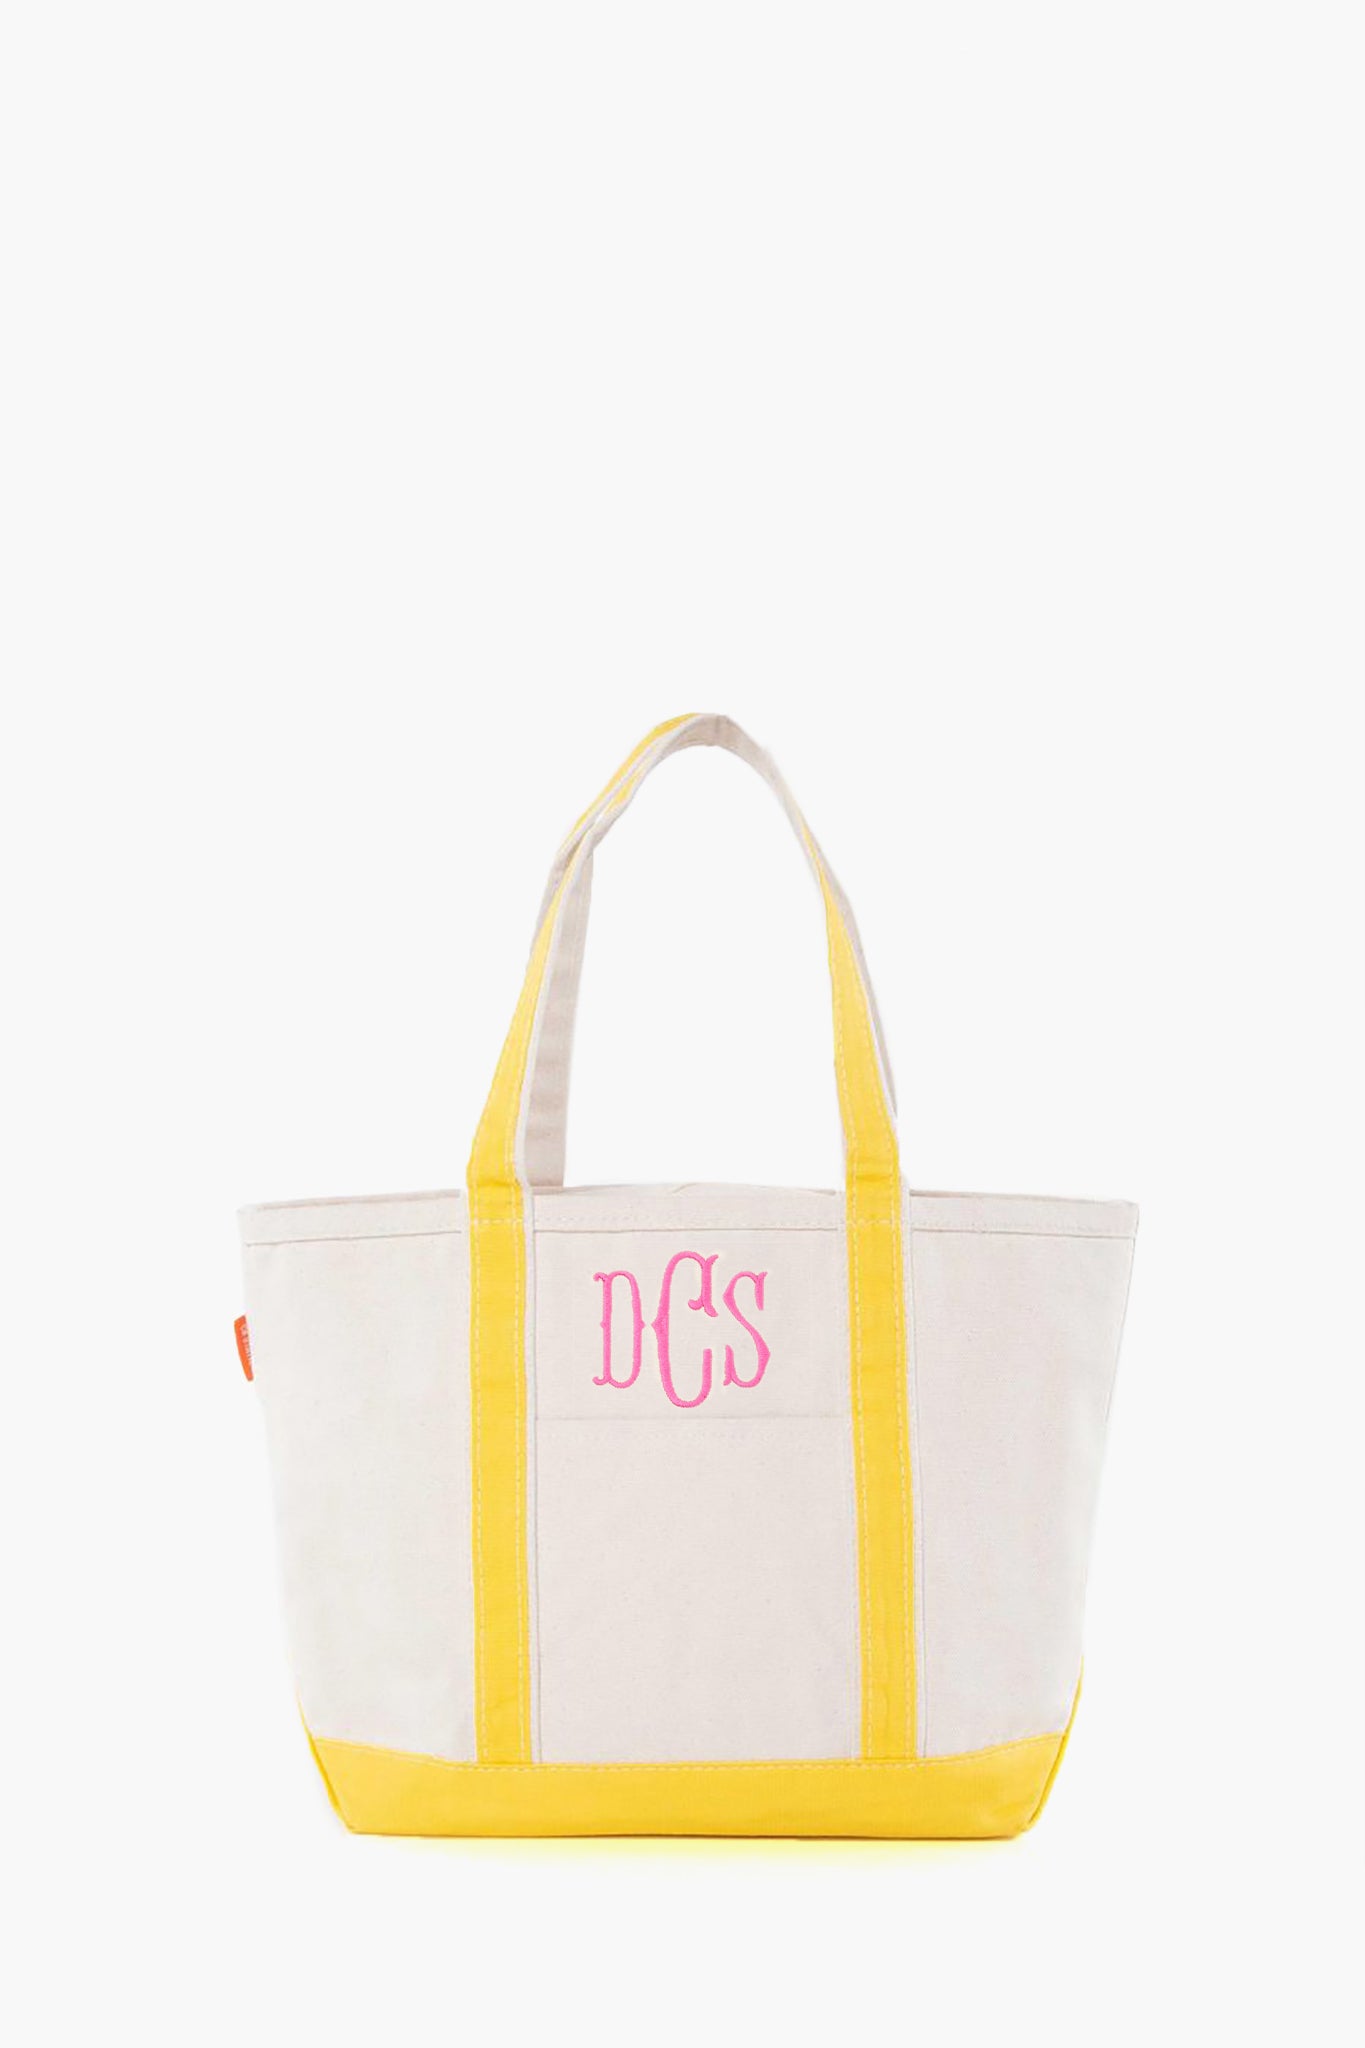 Monogrammed Boat Tote Personalized Large Capacity Canvas Tote Bag